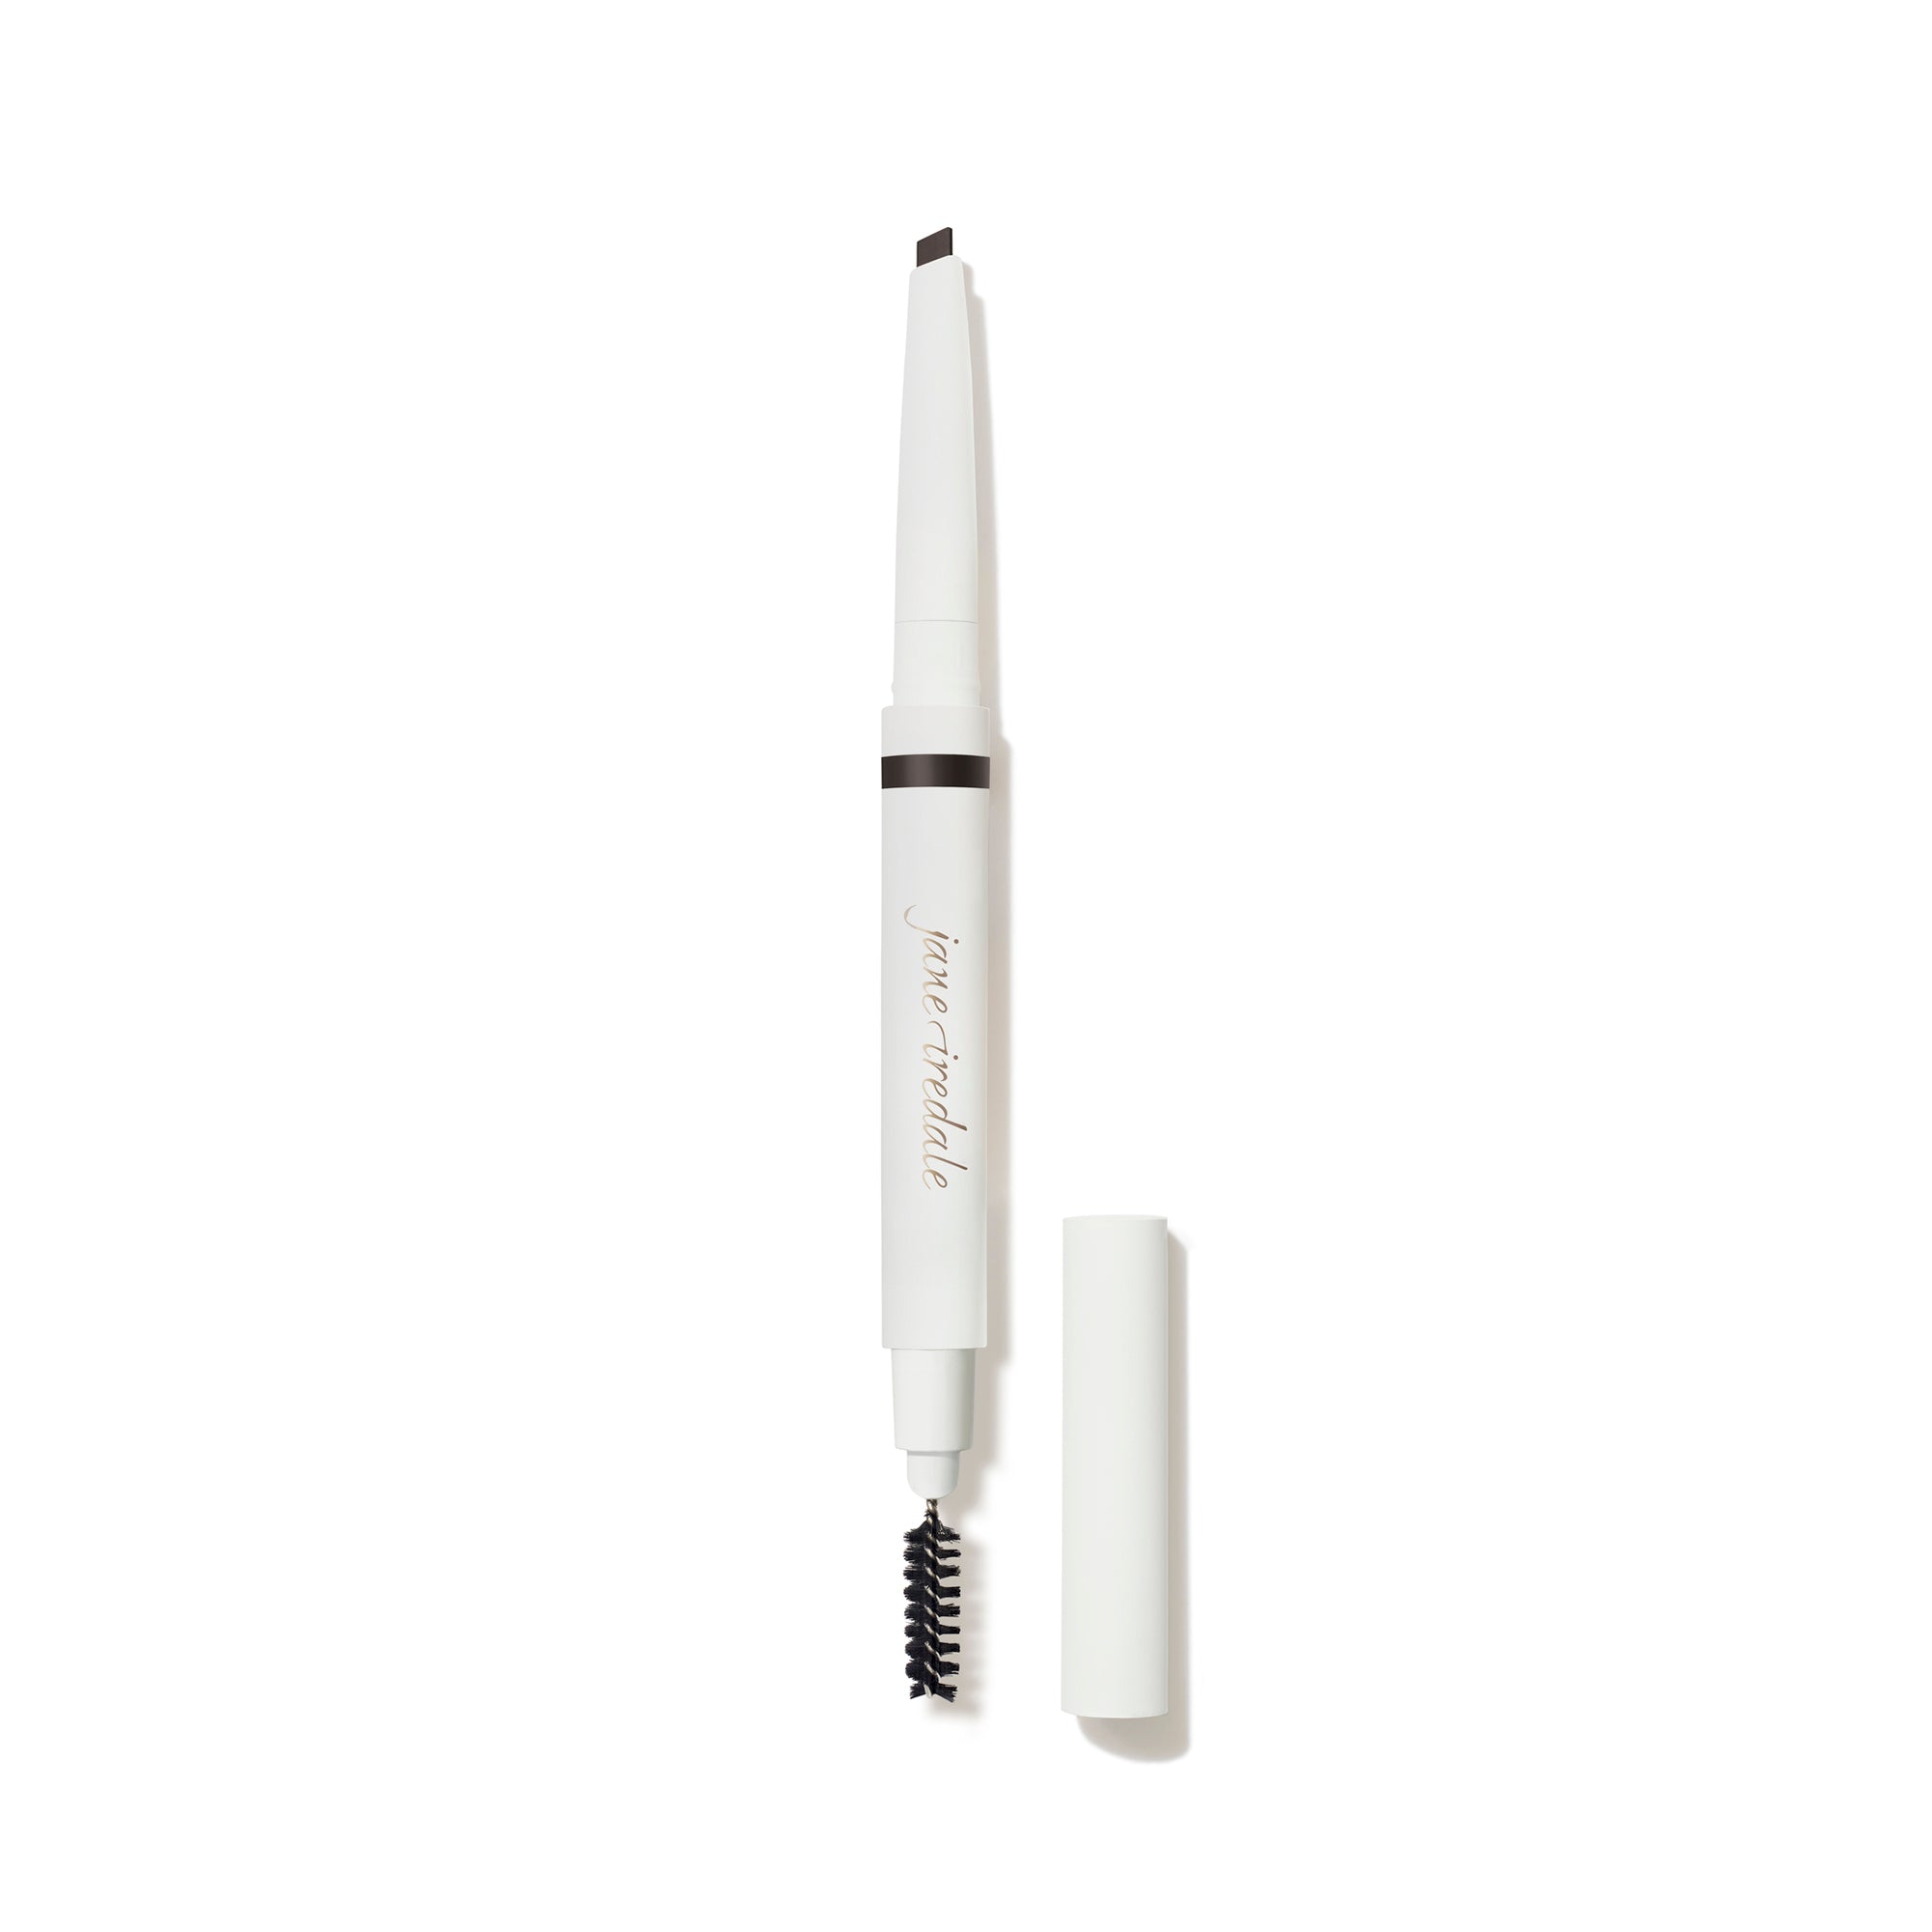  Jane Iredale PureBrow Shaping Pencil / SOFT BLACK